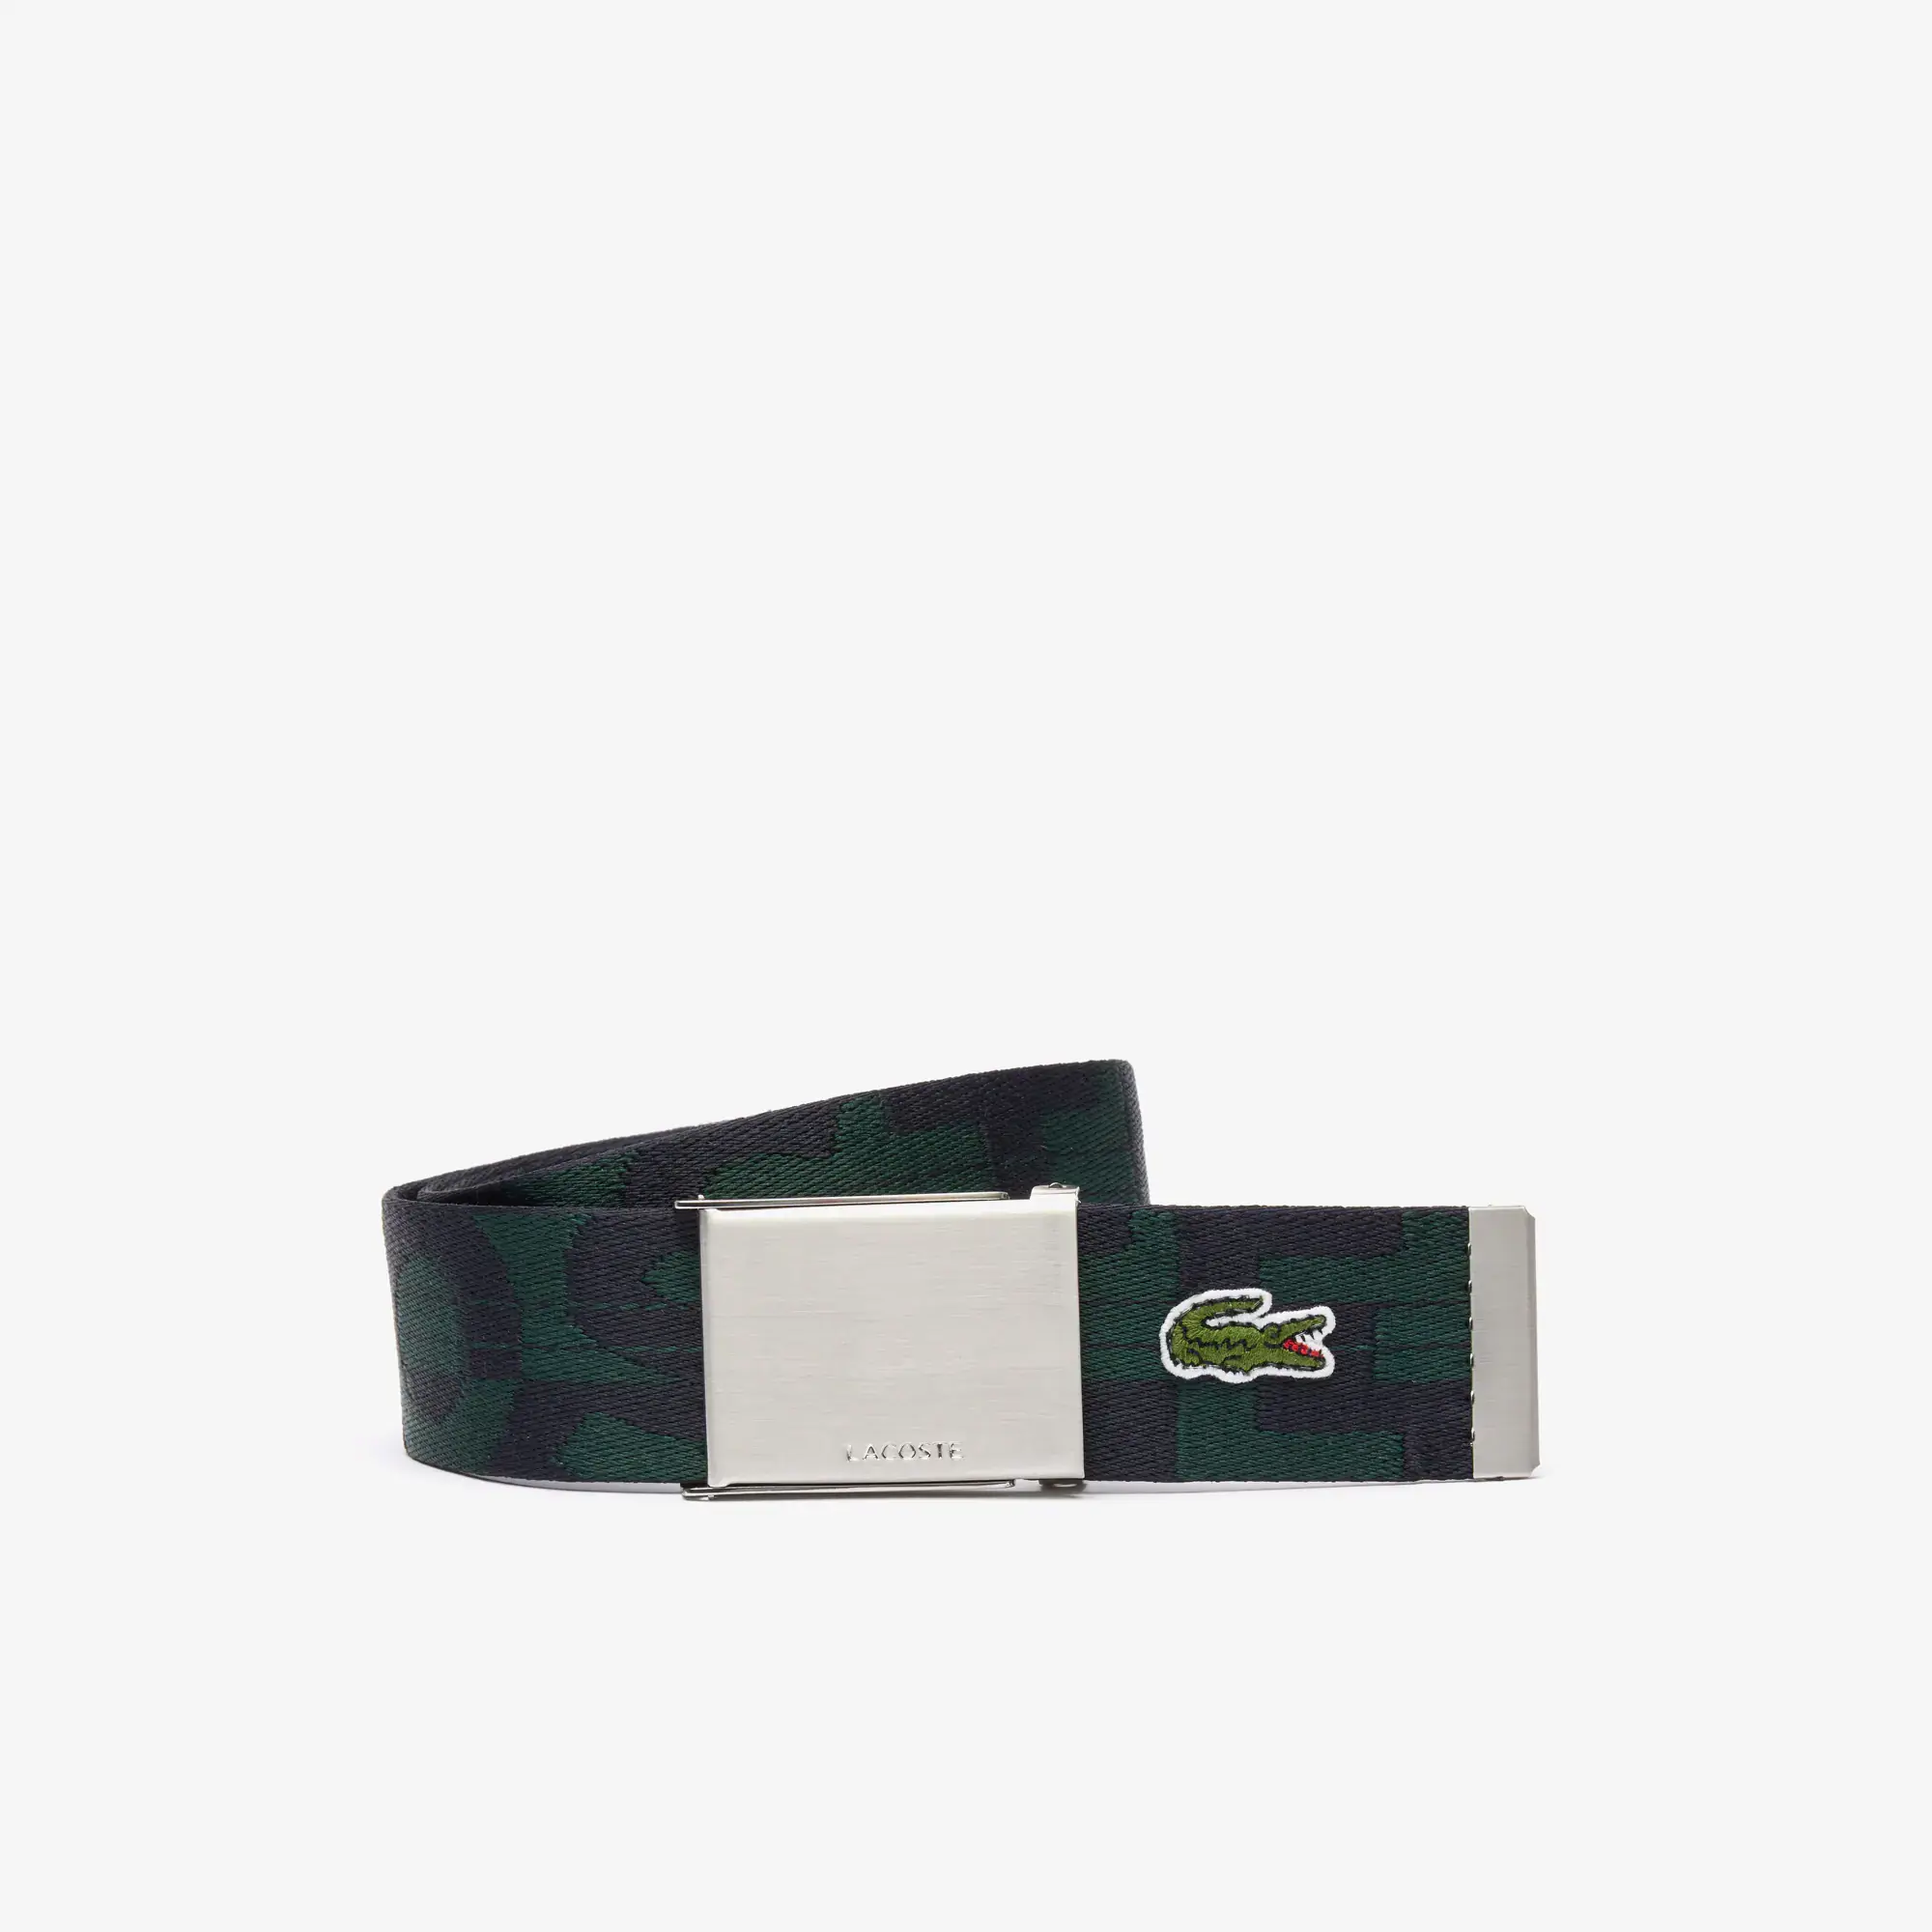 Lacoste Men's Smooth Leather Belt/2 Buckle Gift Set. 1